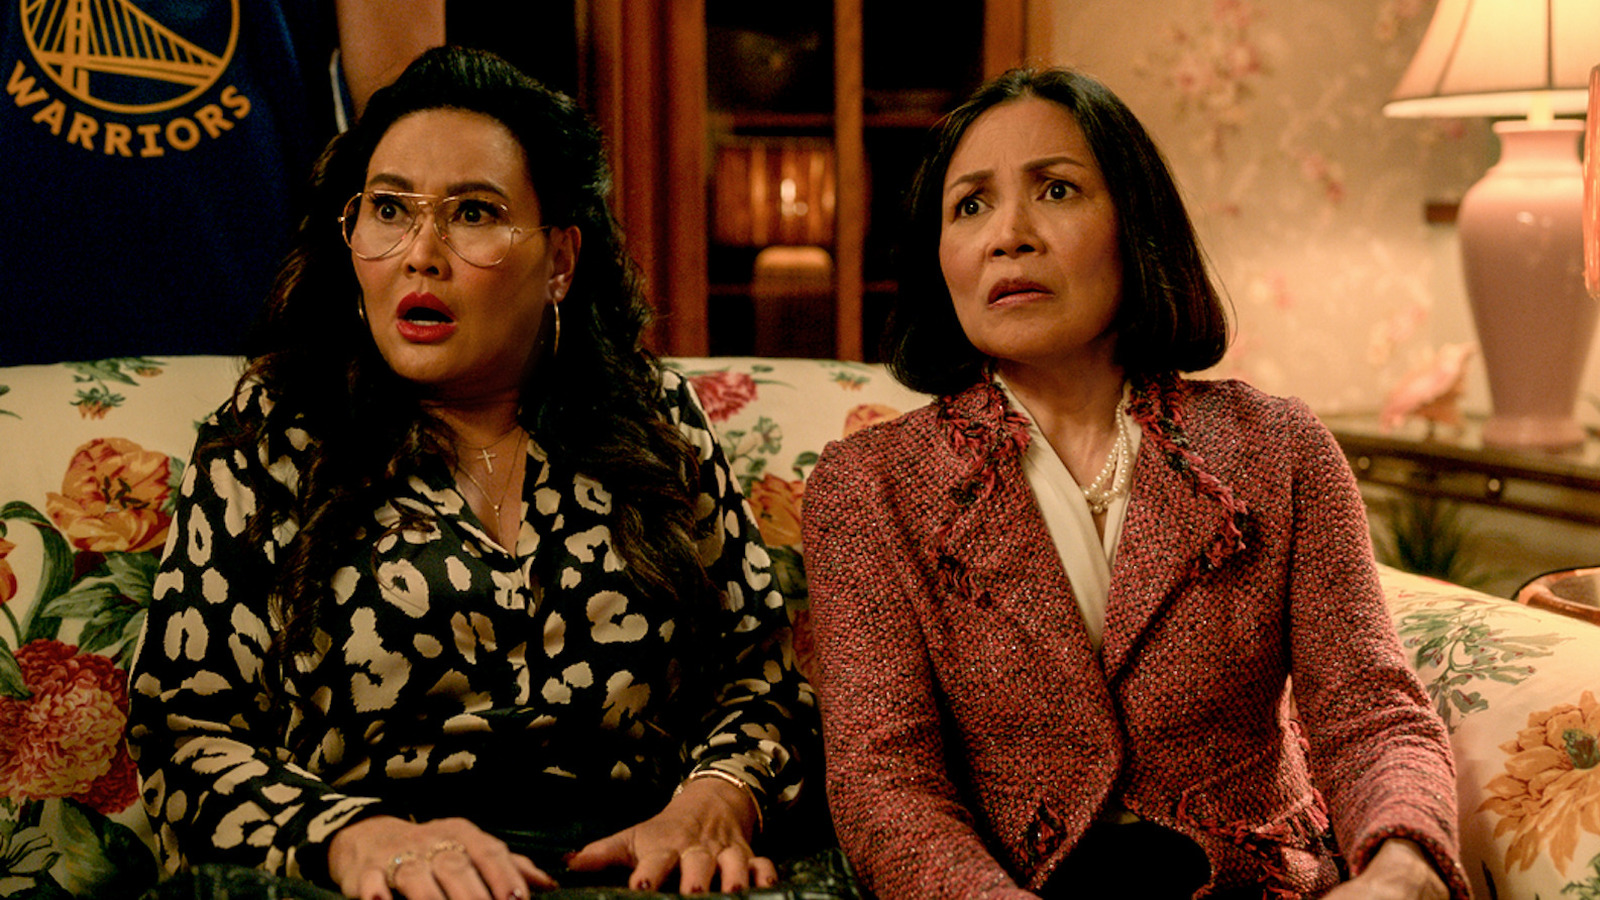 Easter Sunday Stars Tia Carrere And Lydia Gaston On Improv, Filipino Food, And More [Interview]